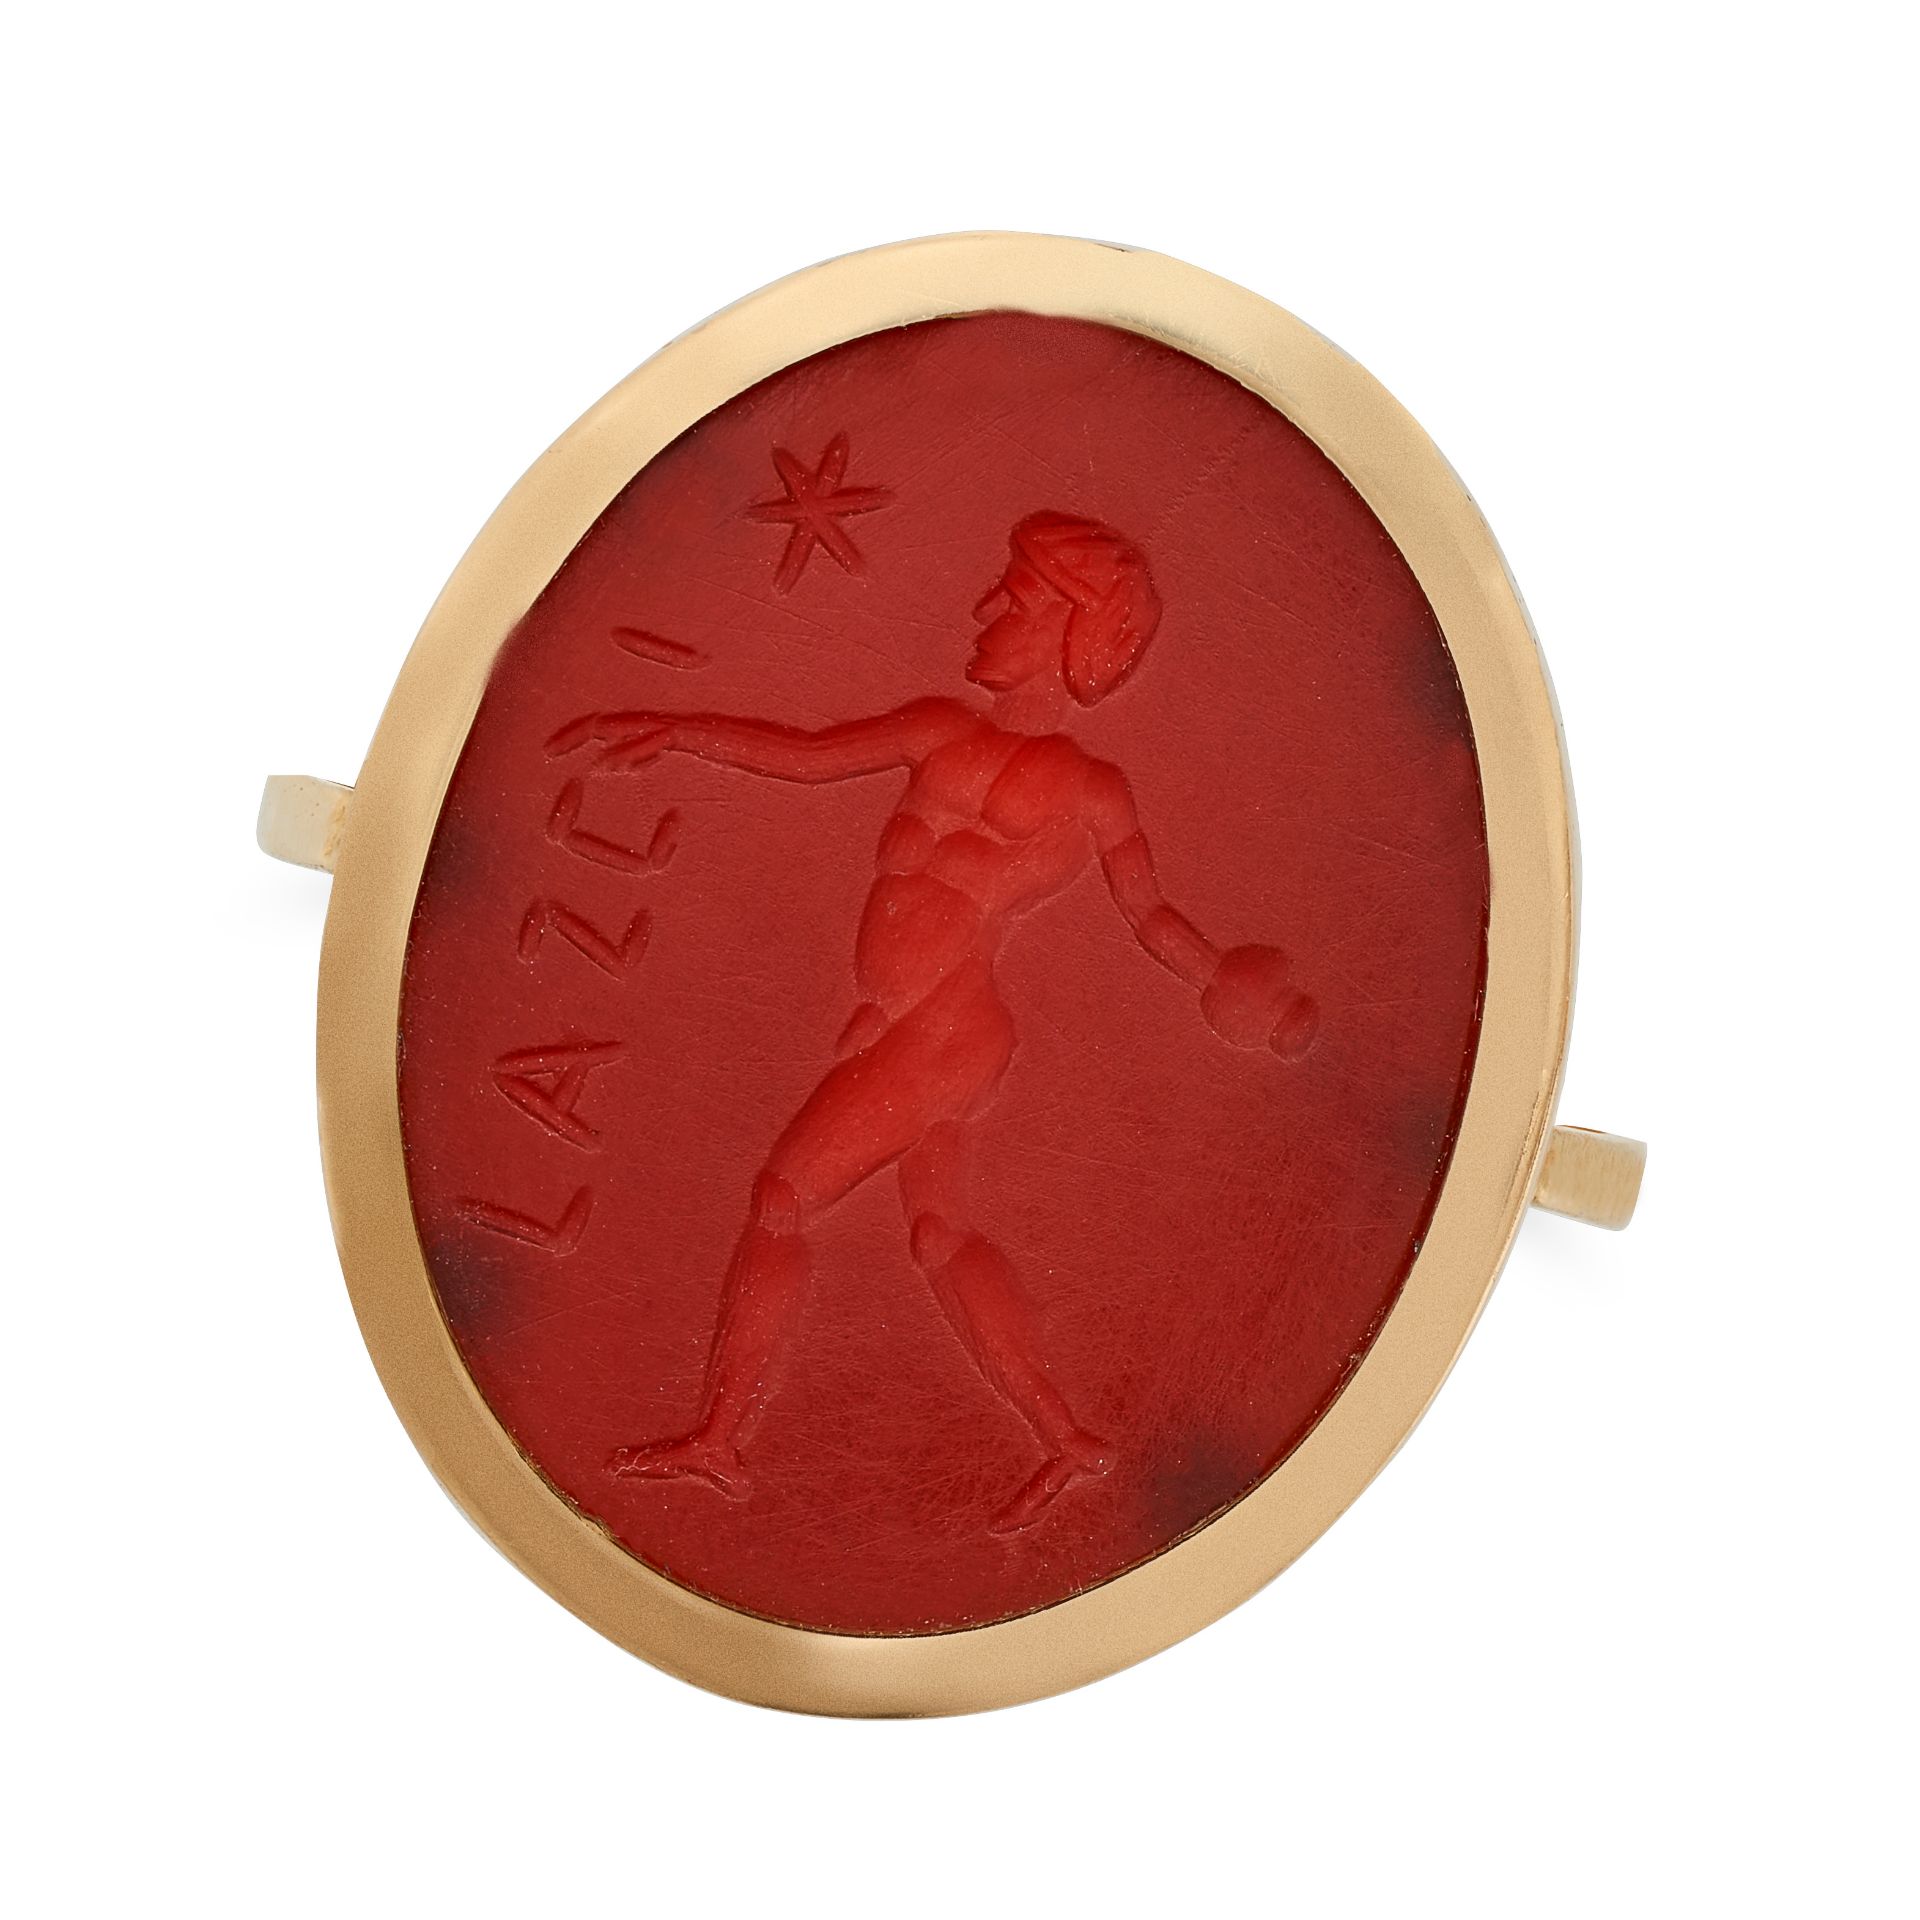 AN ANTIQUE FRENCH CARNELIAN INTAGLIO RING in 18ct yellow gold, set with a carnelian intaglio carv...